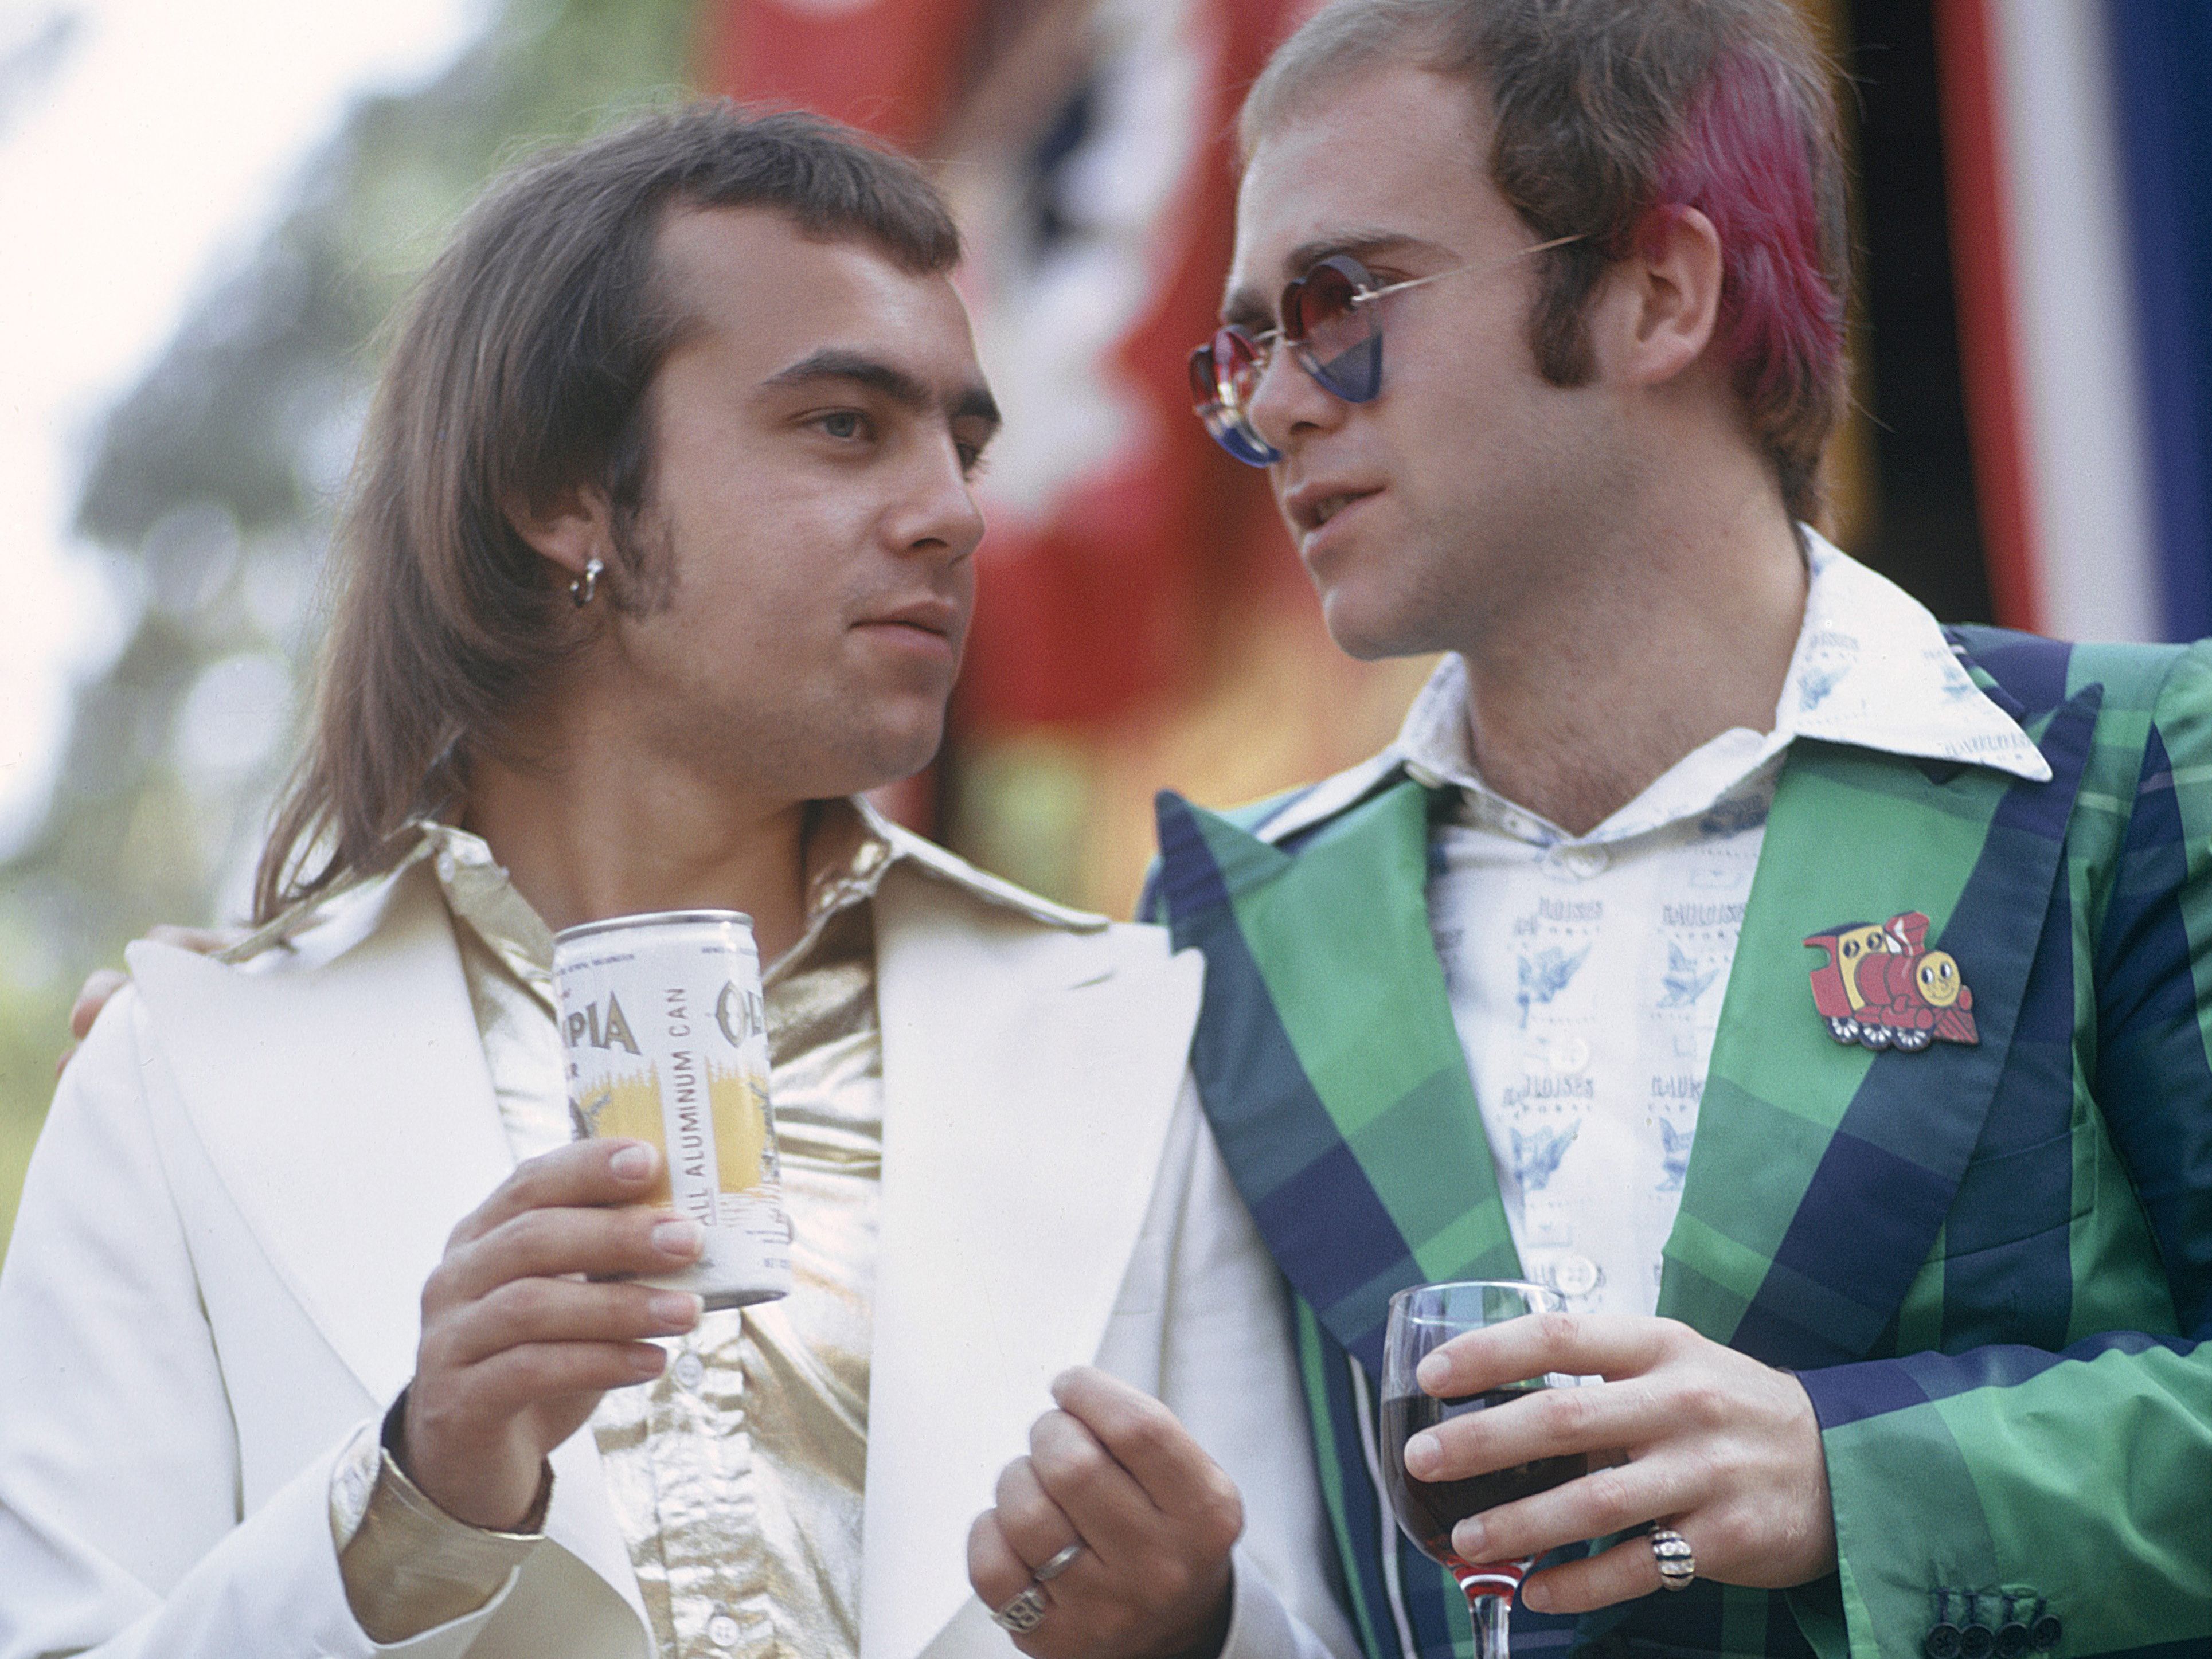 The History of Elton John's 'Your Song